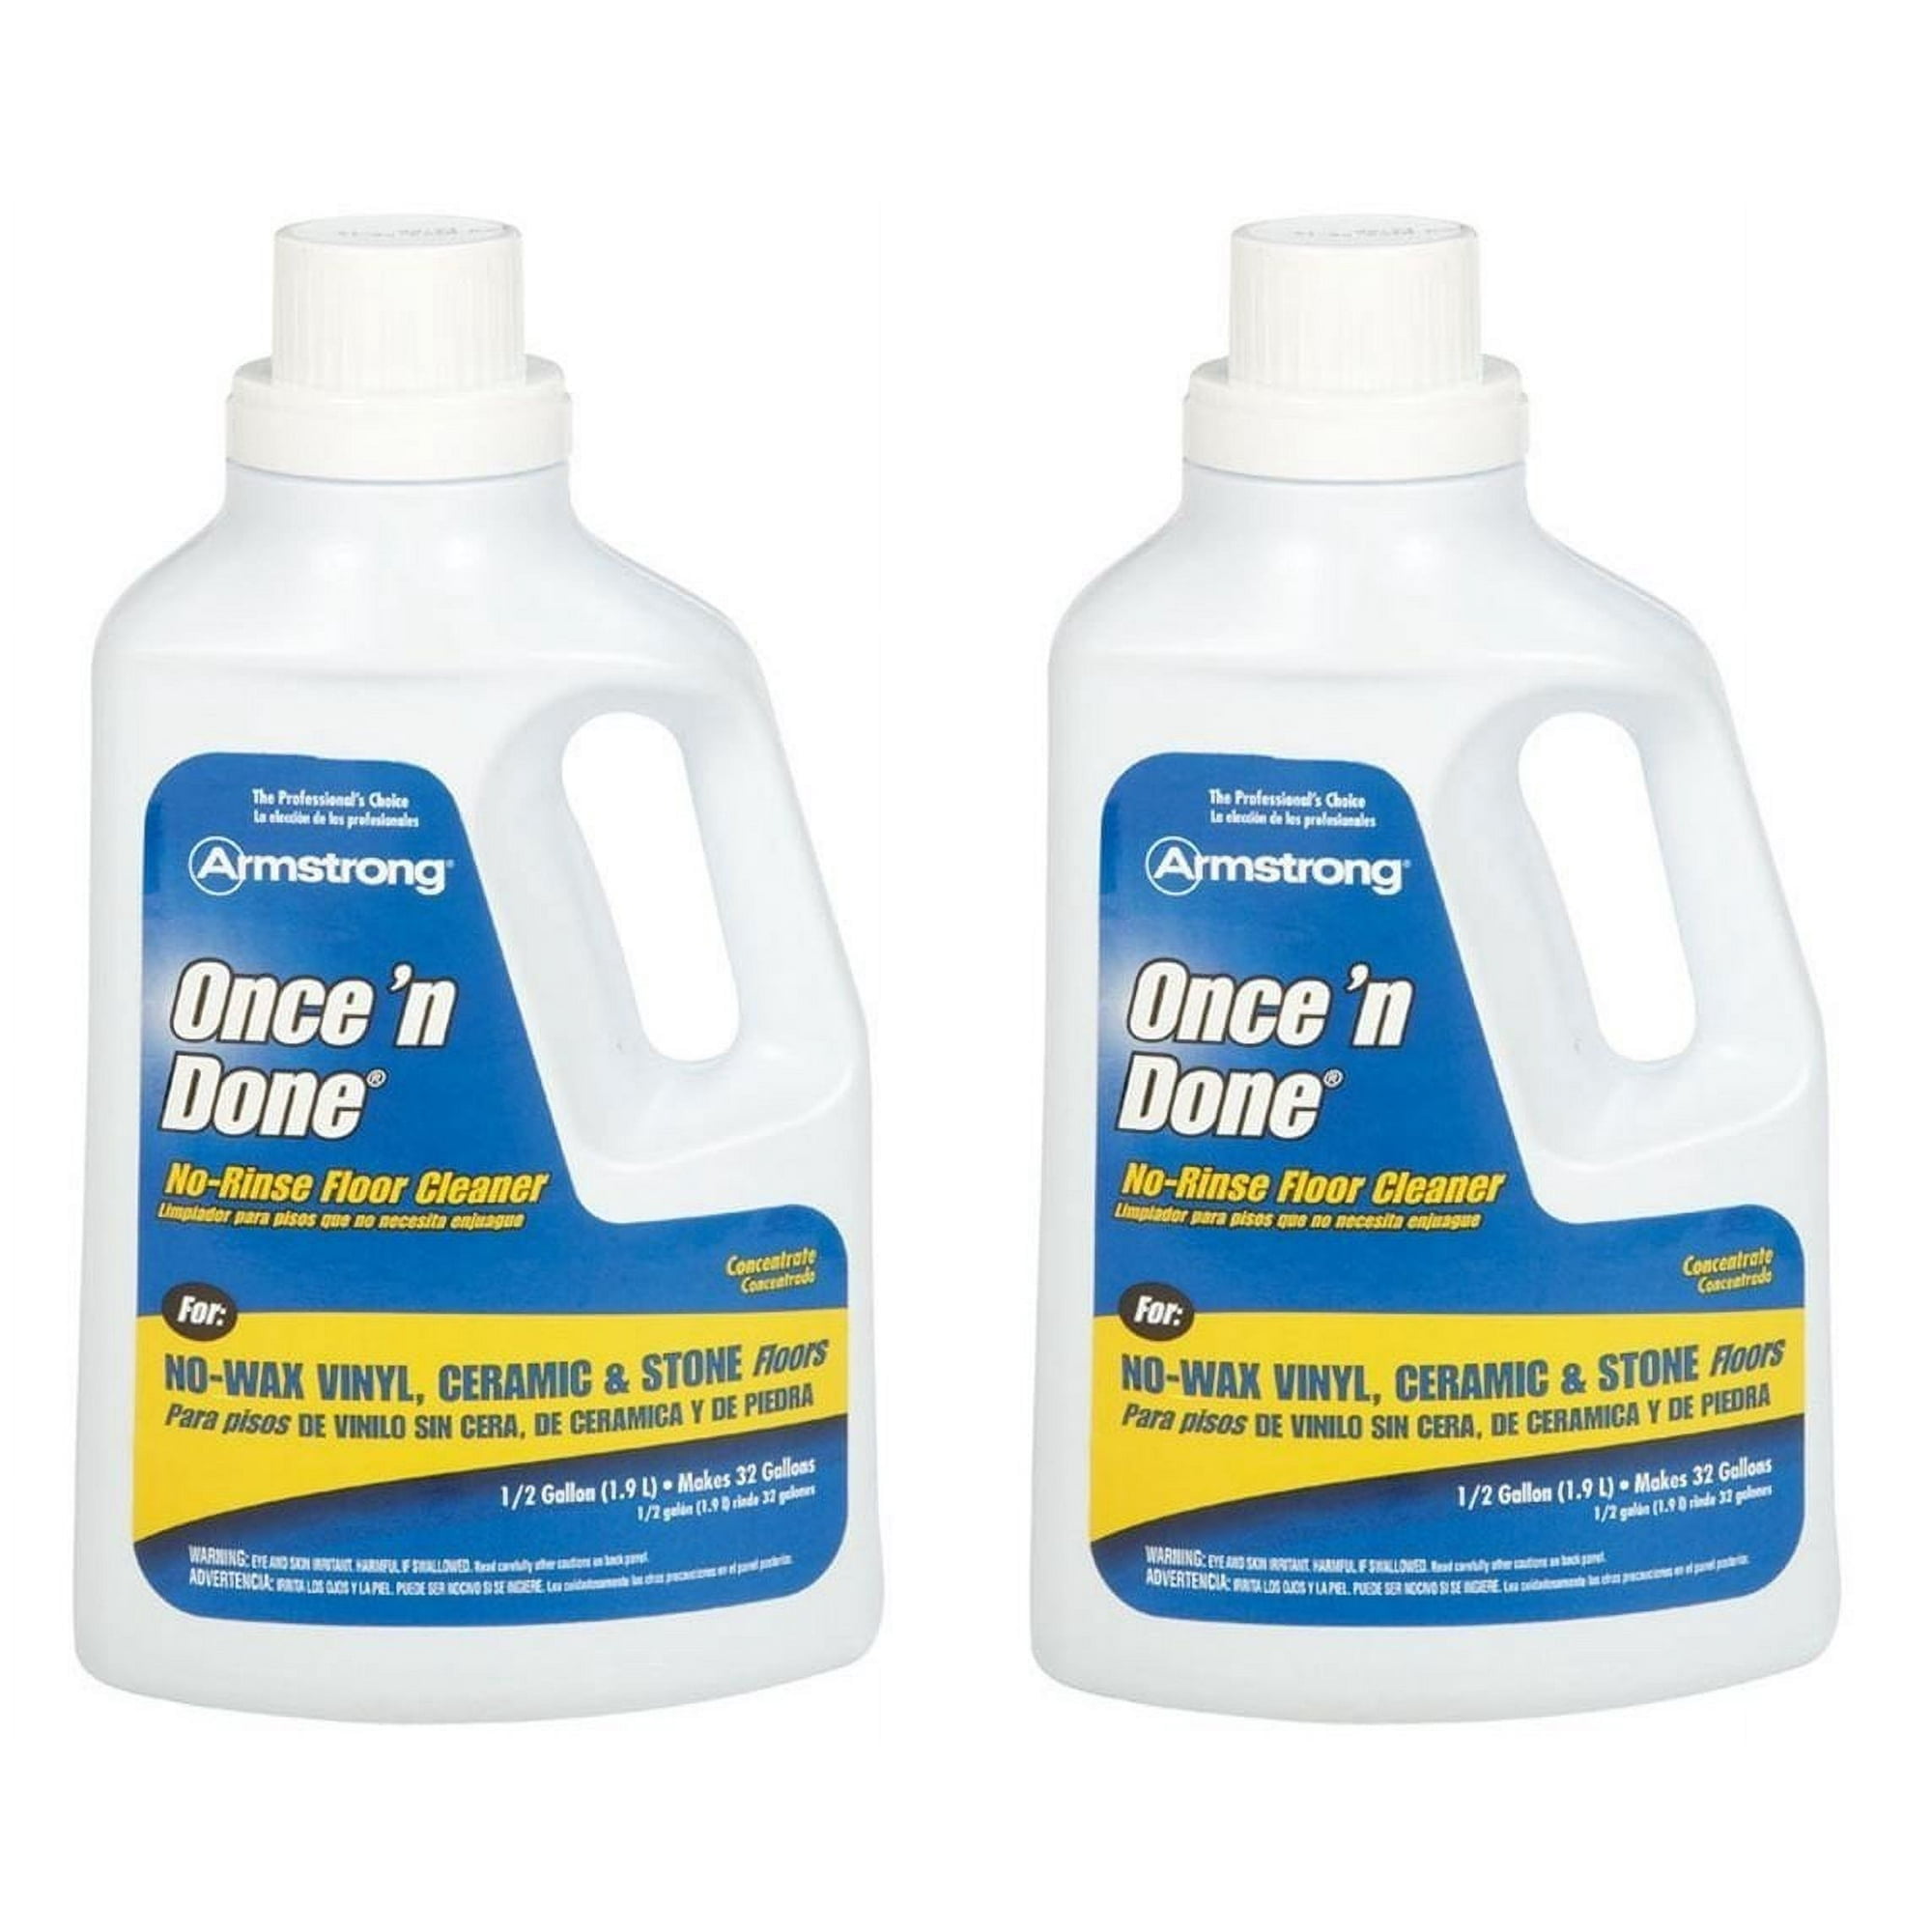 Armstrong Once 'n Done Floor Cleaner Concentrate - 32 fl oz jug